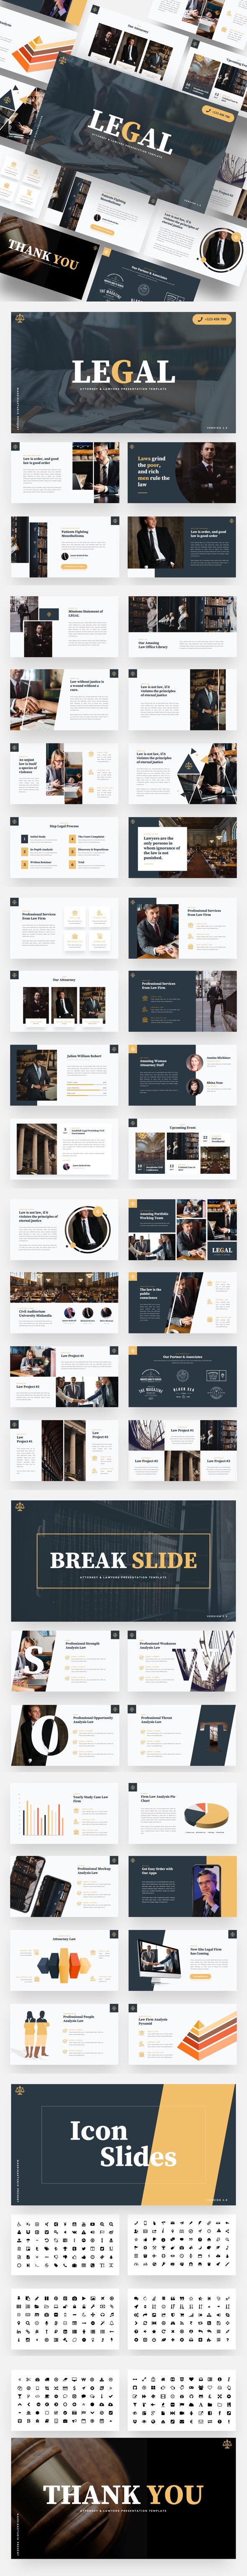 LEGAL - Attourney & Lawyer Powerpoint Template